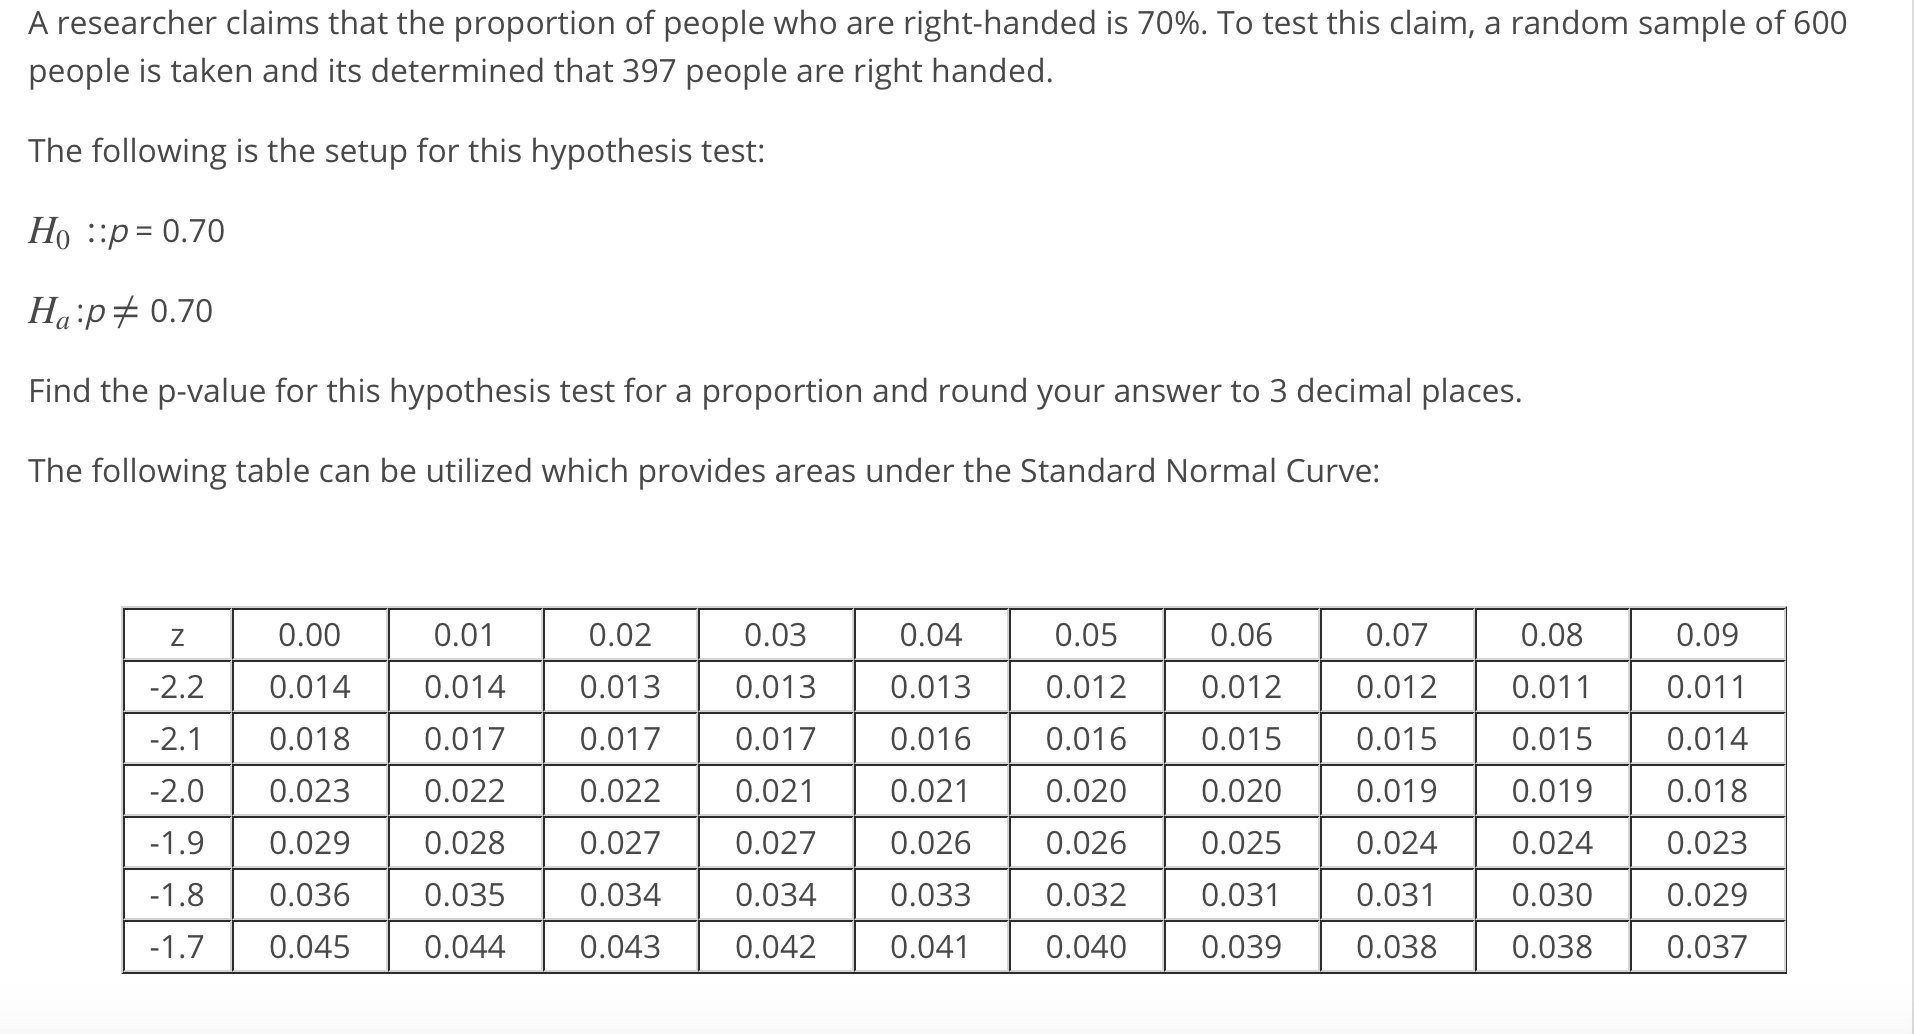 A researcher claims that the proportion of people who are right-handed is 70%. To test this claim, a random sample of 600
people is taken and its determined that 397 people are right handed
The following is the setup for this hypothesis test:
Ha:pt0.70
Find the p-value for this hypothesis test for a proportion and round your answer to 3 decimal places.
The following table can be utilized which provides areas under the Standard Normal Curve:
0.00
2.20.014
2.1 0.018
2.0 0.023
1.9 0.029
1.80.036
-1.7 0.045
0.01
0.014
0.017
0.022
0.028
0.02
0.013
0.017
0.022
0.027
0.034
0.043
0.03
0.013
0.017
0.021
0.027
0.034
0.042
0.04
0.013
0.016
0.021
0.026
0.033
0.041
0.05
0.012
0.0160.015
0.020
0.026 0.025
0.032
0.040
0.07
0.012
0.015
0.019
0.024
0.031
0.038
0.08
0.011
0.015
0.019
0.024
0.030
0.038
0.09
0.011
0.014
0.018
0.023
0.029
0.037
0.06
0.012
0.020
0.035
0.031
0.044
0.039
